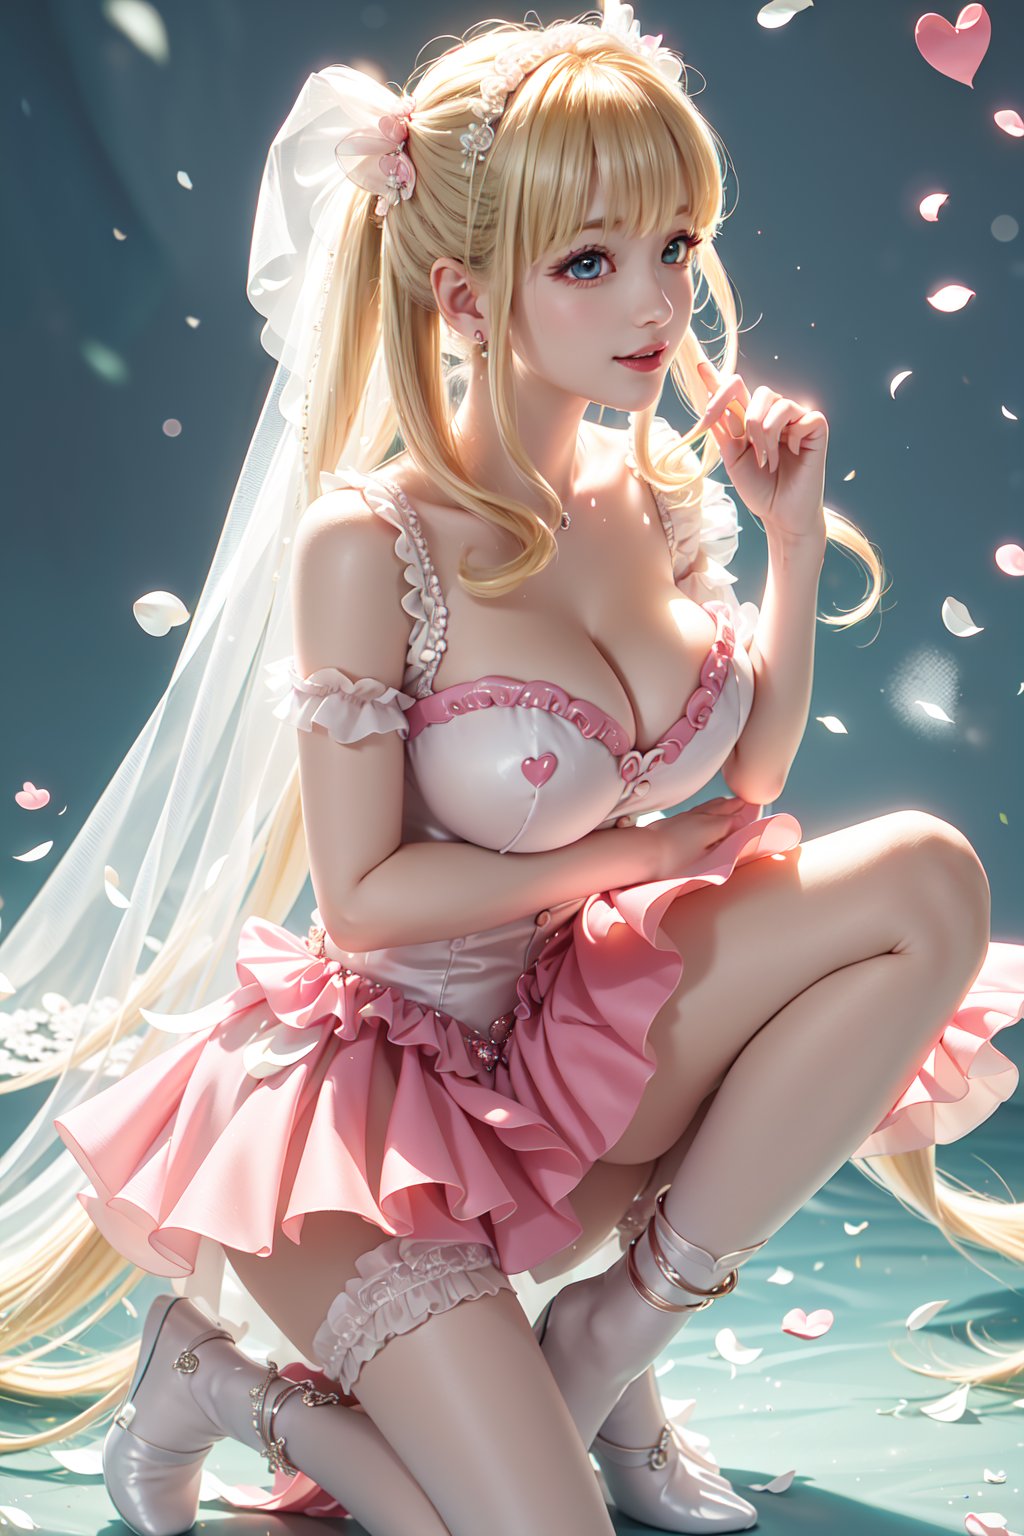 ((from front, Squating down, spread legs, hands on knees, butt, underwear, exposed breasts, She wears revealing pink frilled weeding dress, Wedding gown (veil), blond very long hair, Heart-shaped twintails, large breasts 2.0)), cute pose, large breasts, cleavage , blue eyes, (Masterpiece), full body shot, best quality, high resolution, highly detailed, detailed background, movie lighting, 1girl, idol, underbust, stage, stage lights, music, blush, sweet smile, sweat, concert, ruffles, confetti, hearts, hair accessories, hair bows, gems, jewelry, neon lights , bow tie , pointing, spotlight, sparkles, light particles, frame breasts, cross lace, white stockings,ryuubi,lift skirt,hmnl,floral dress, twintails